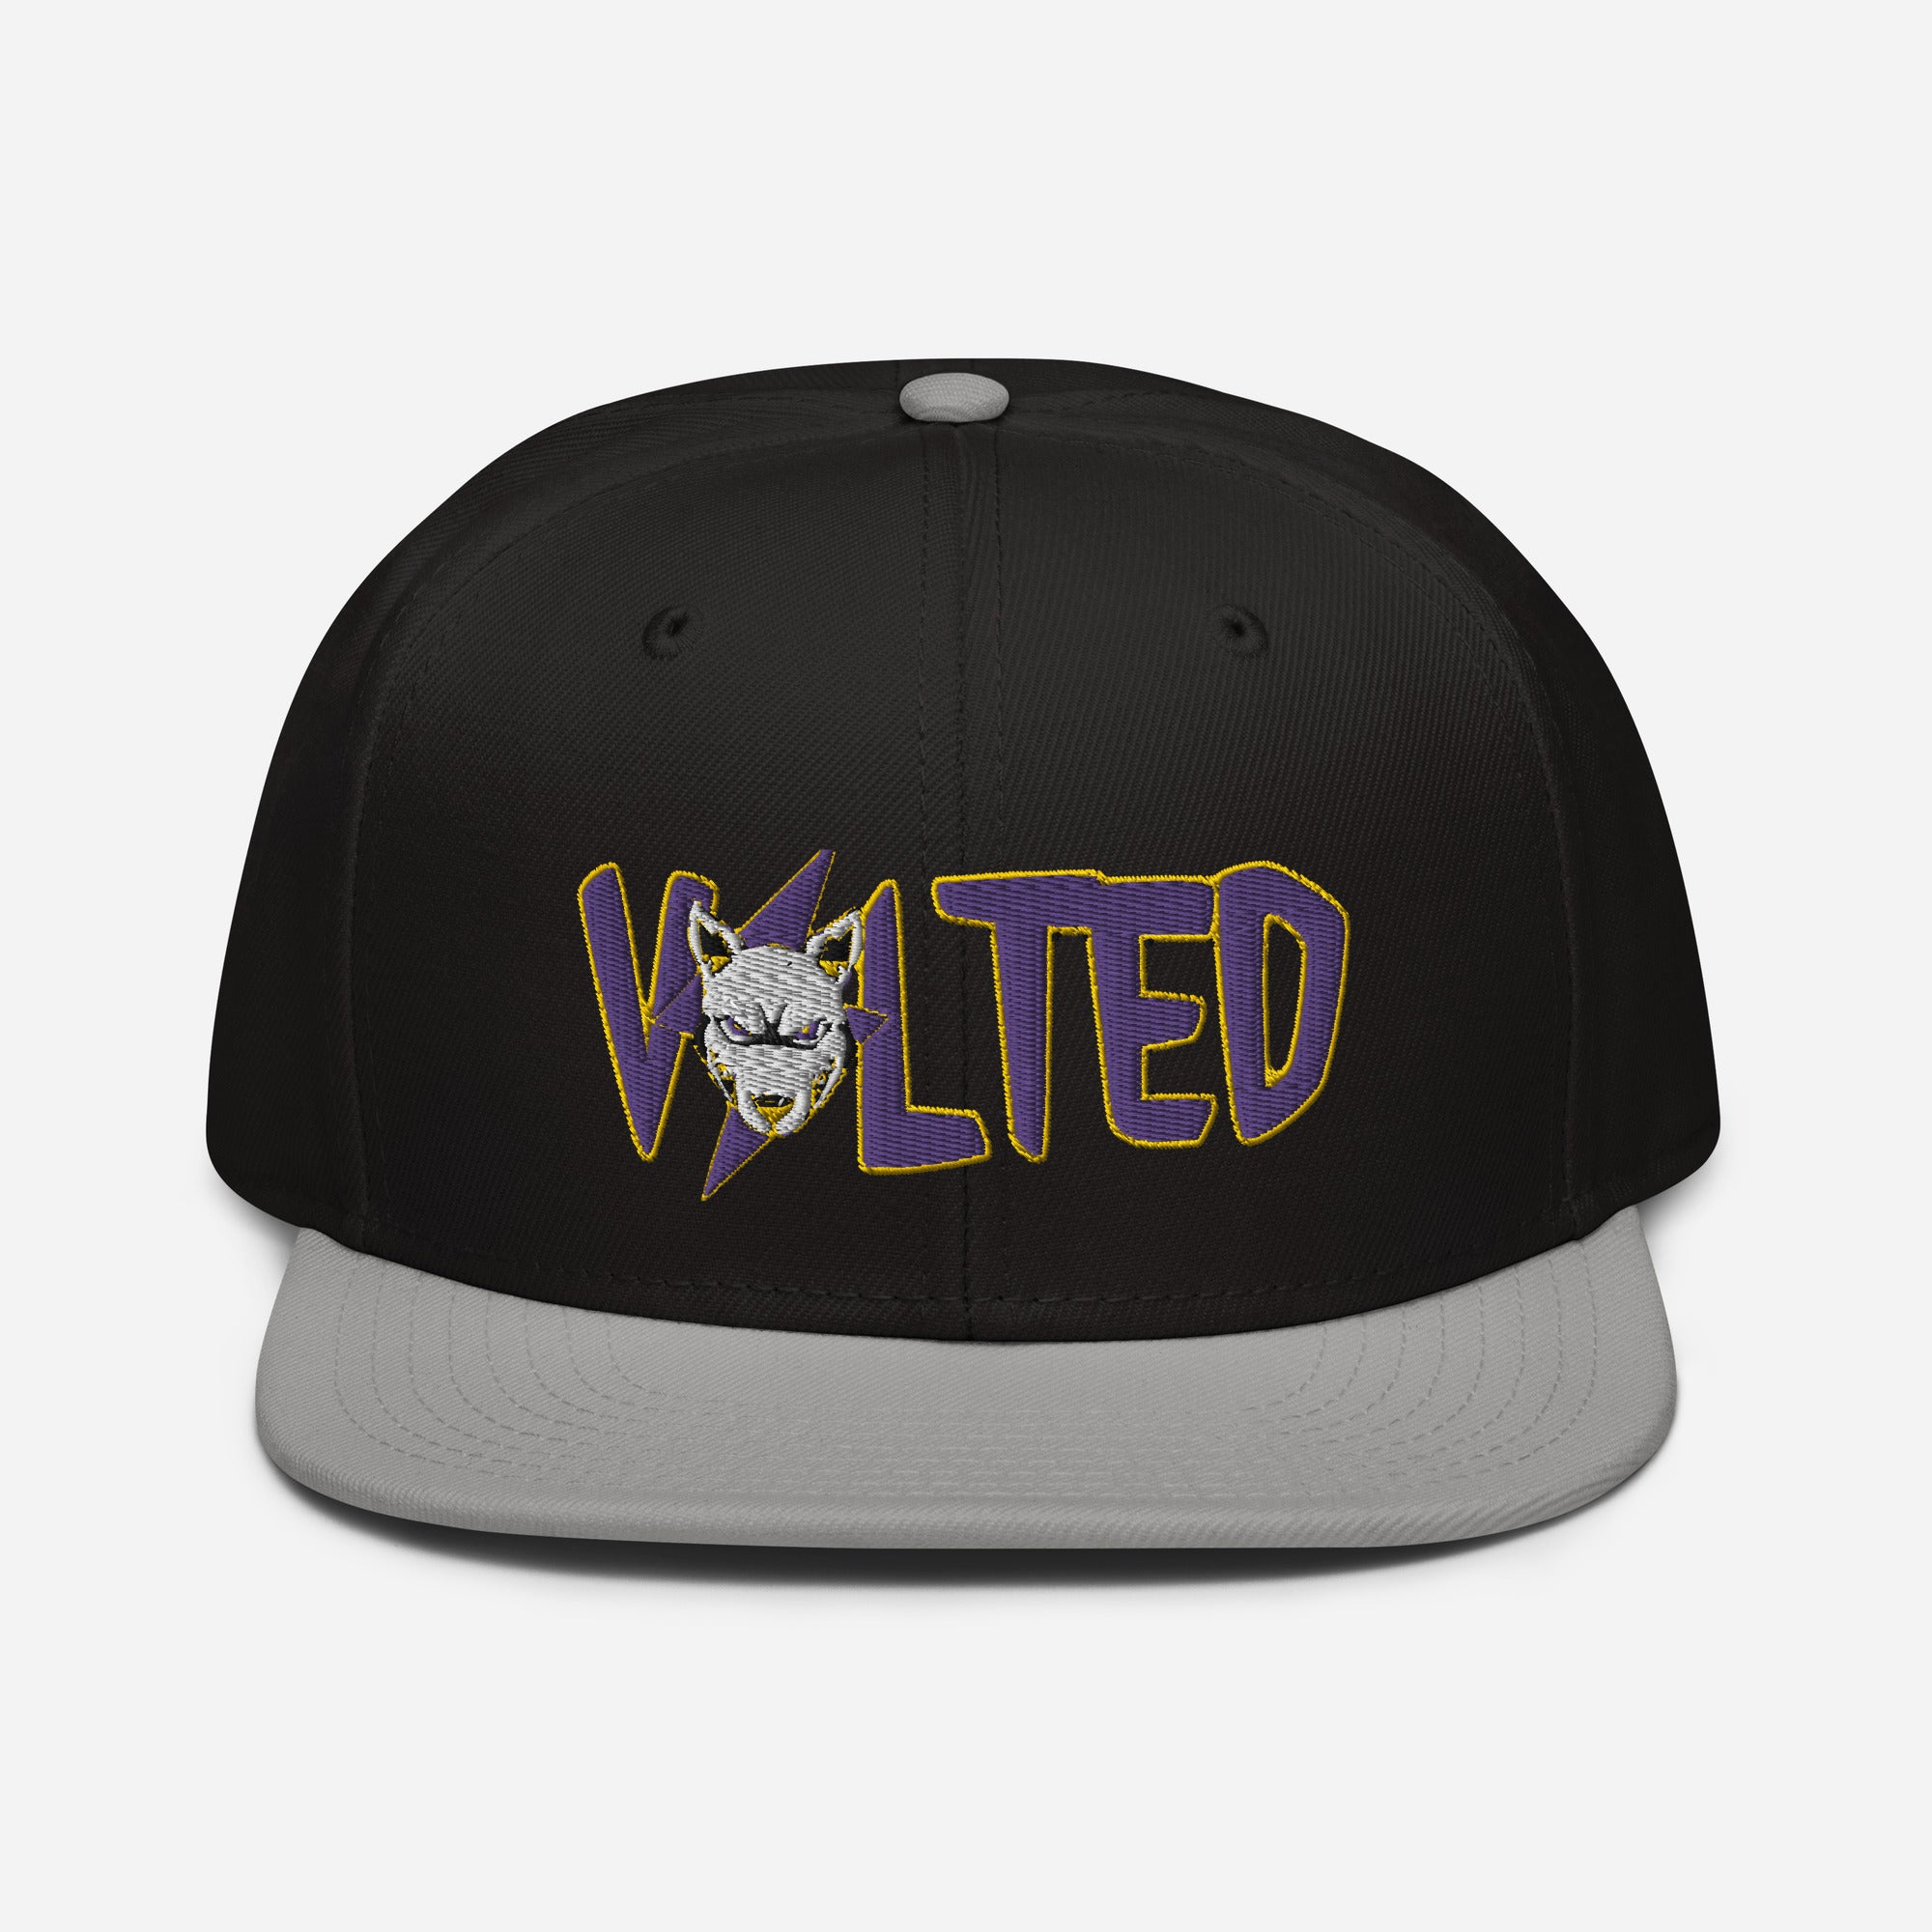 Volted Gold n Purp Snapback